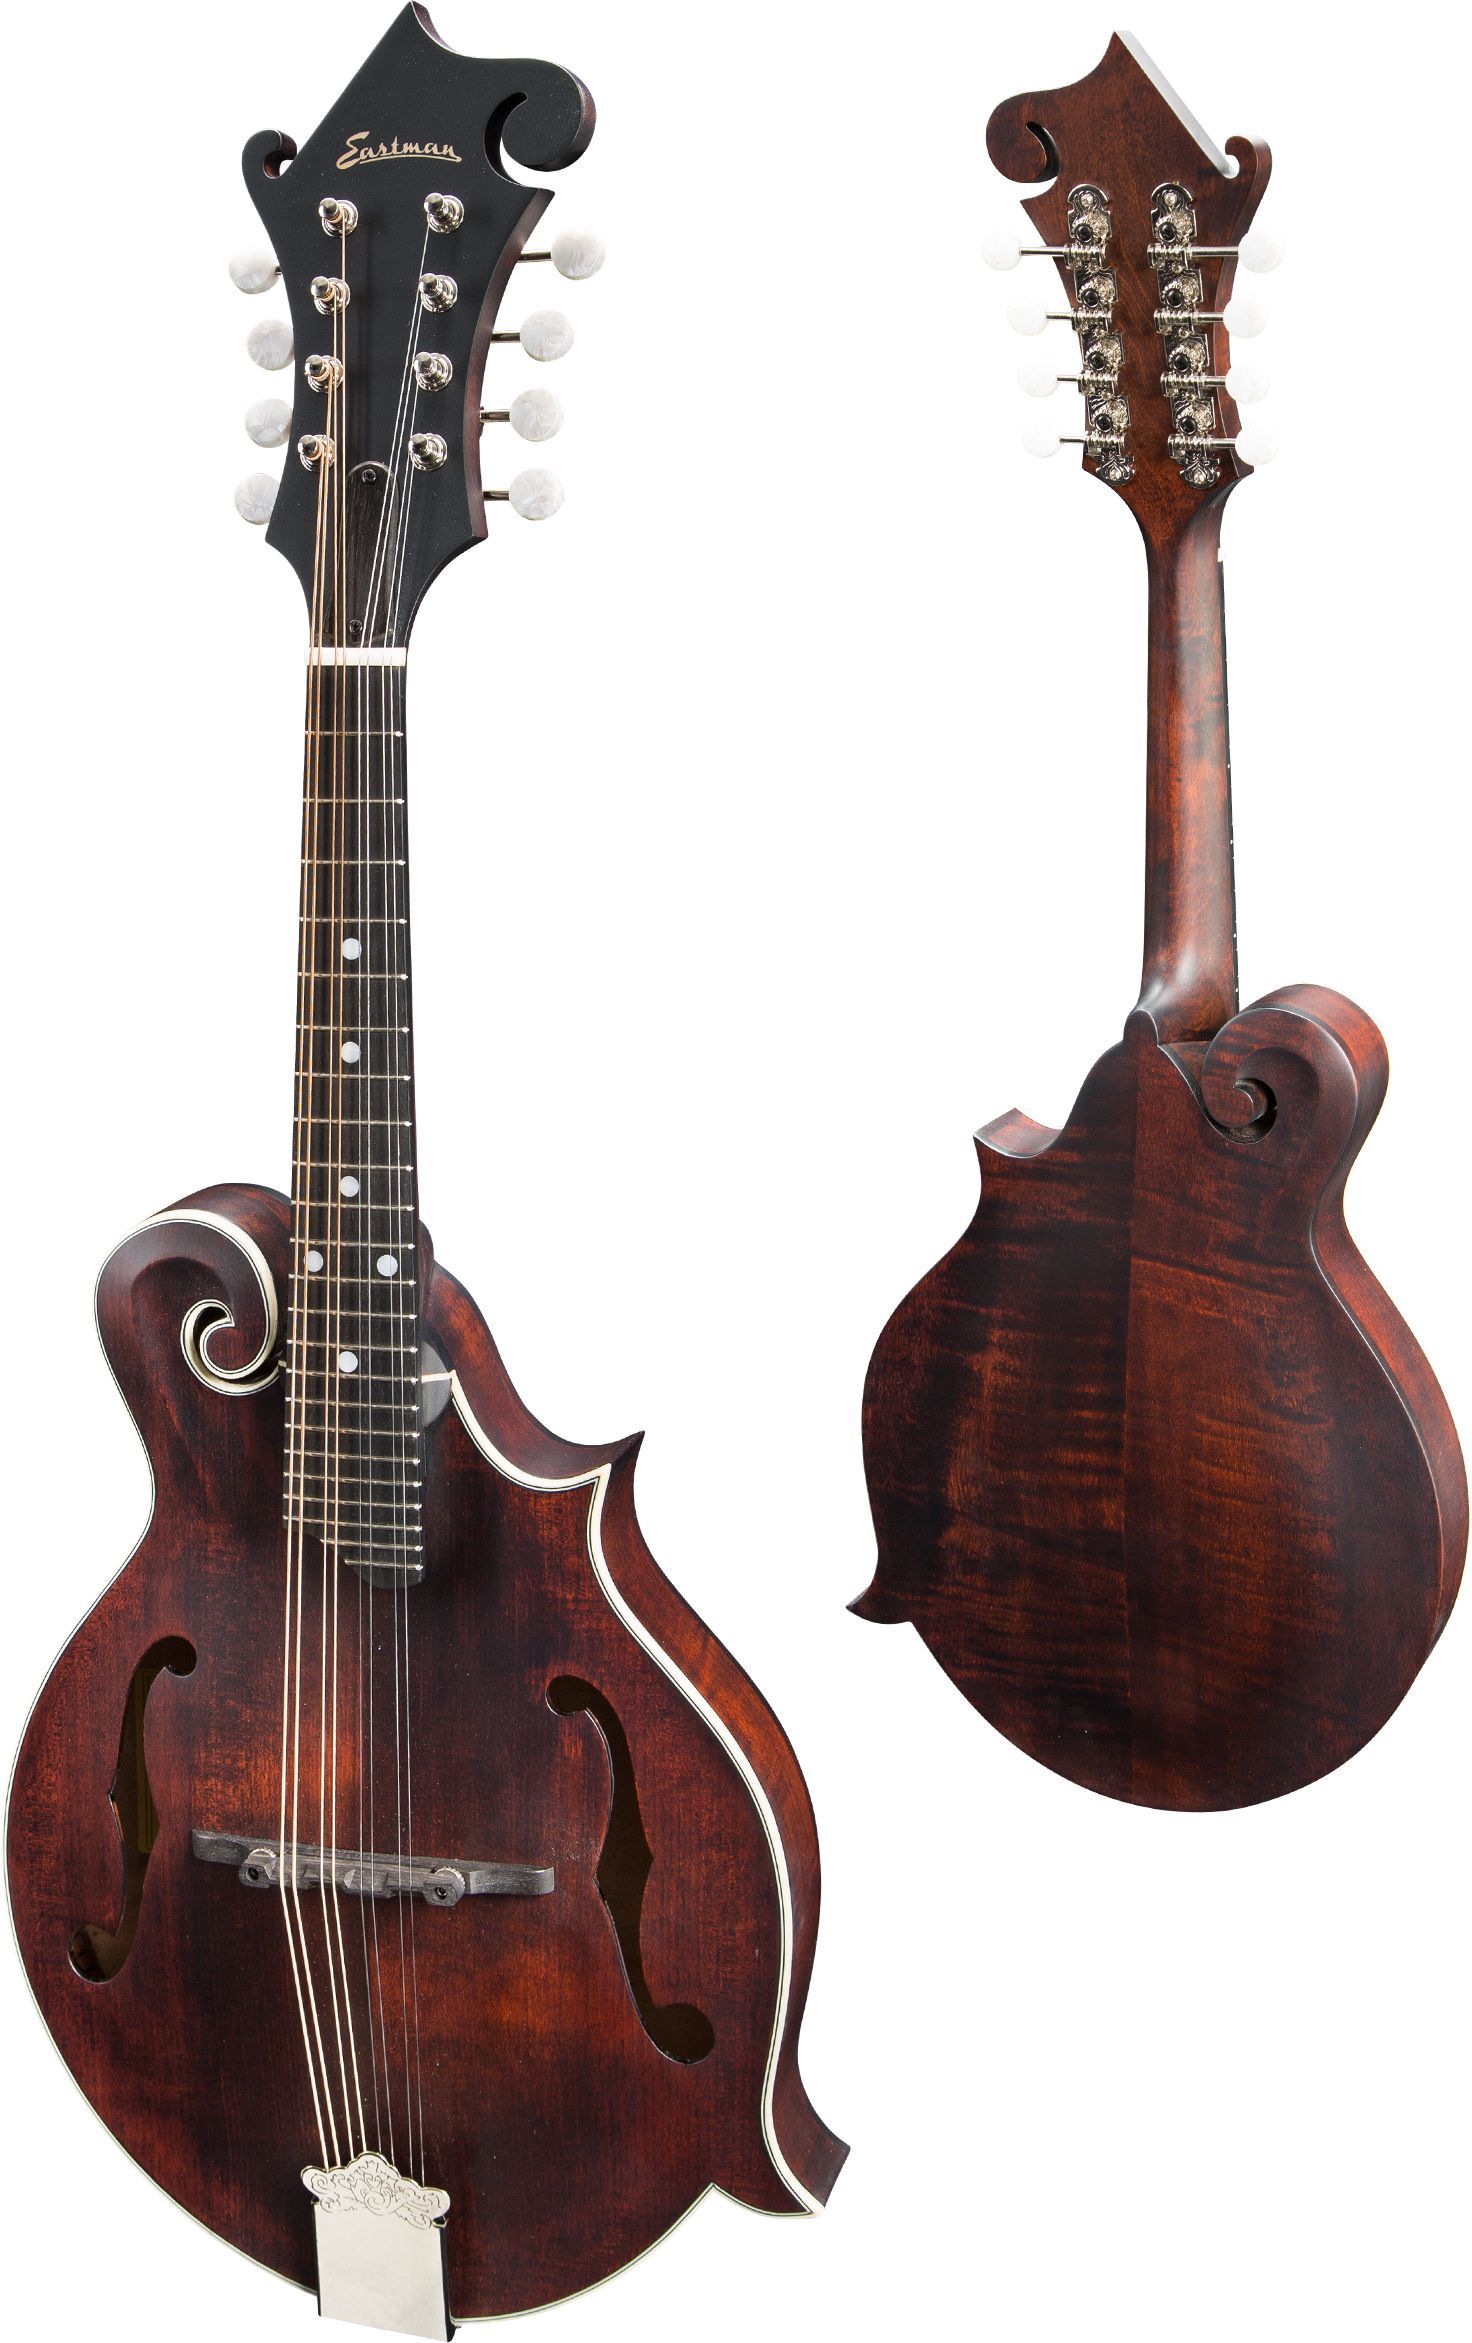 Eastman MD315 F-style Mandolin (F-holes, Solid Spruce top, Solid Maple back and sides, w/Gigbag), Mandolin for sale at Richards Guitars.